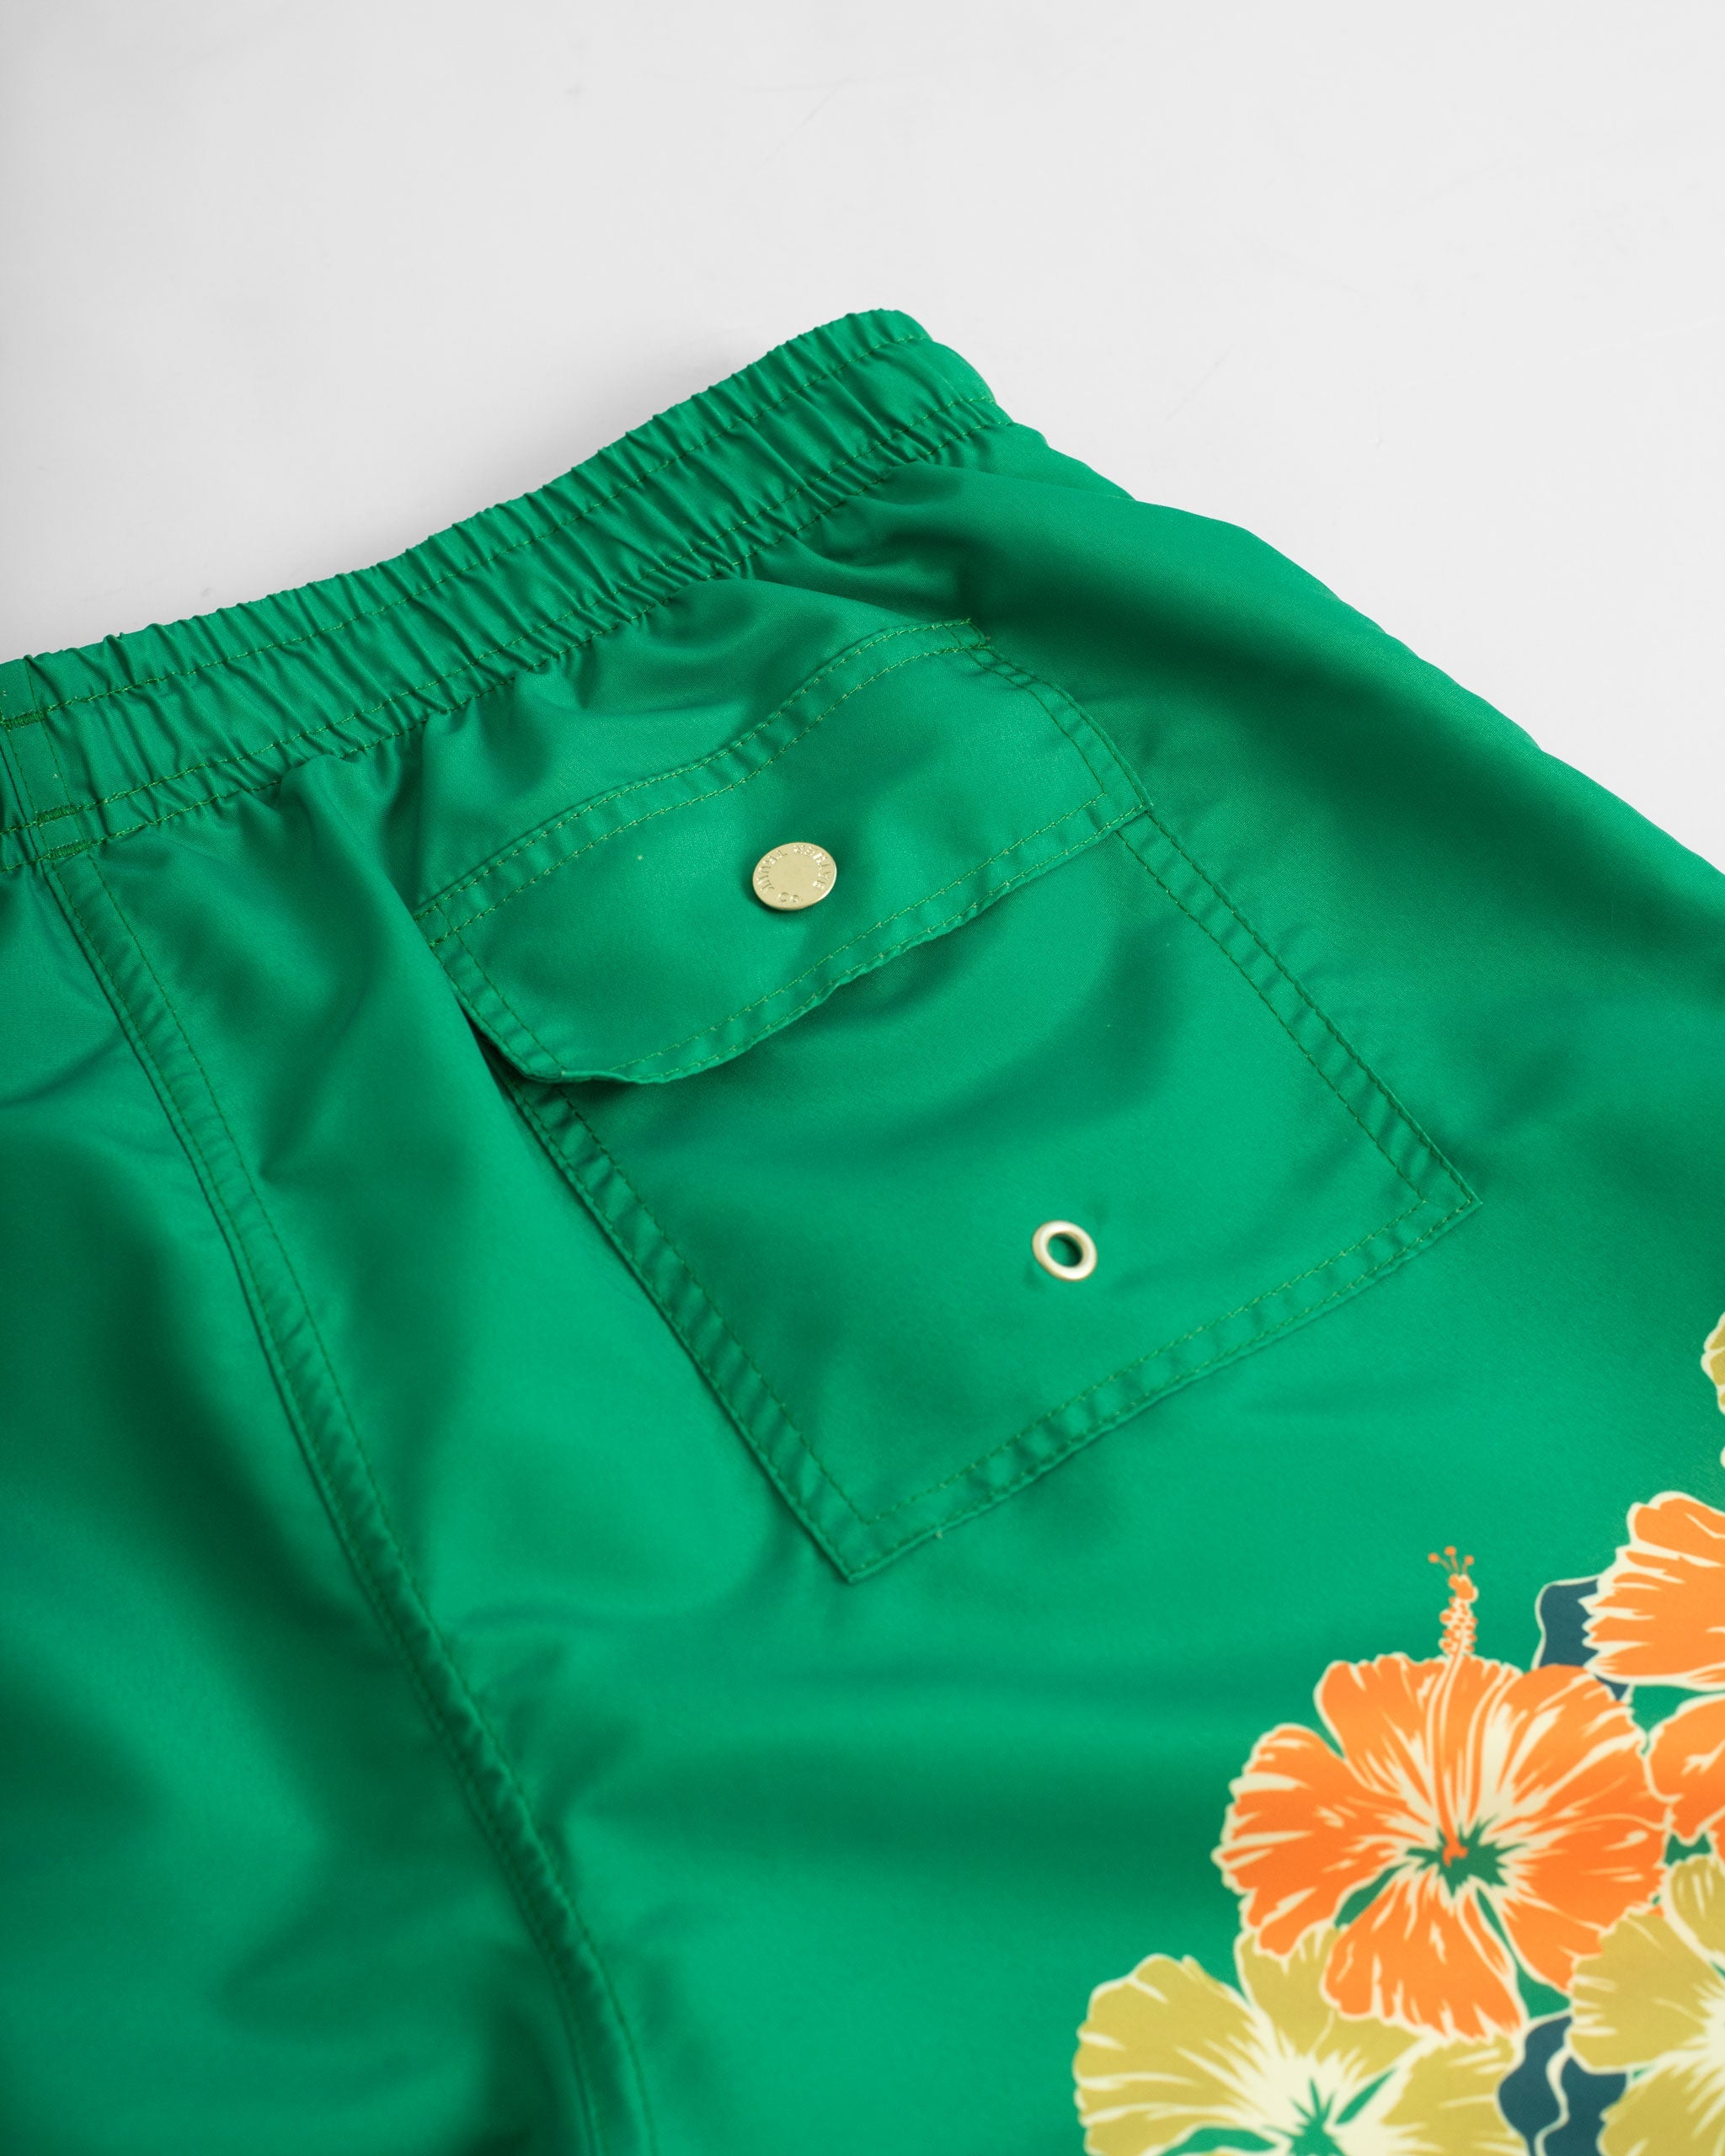 back pocket close up of Green swim trunk with floral motif pattern on the bottom of the leg